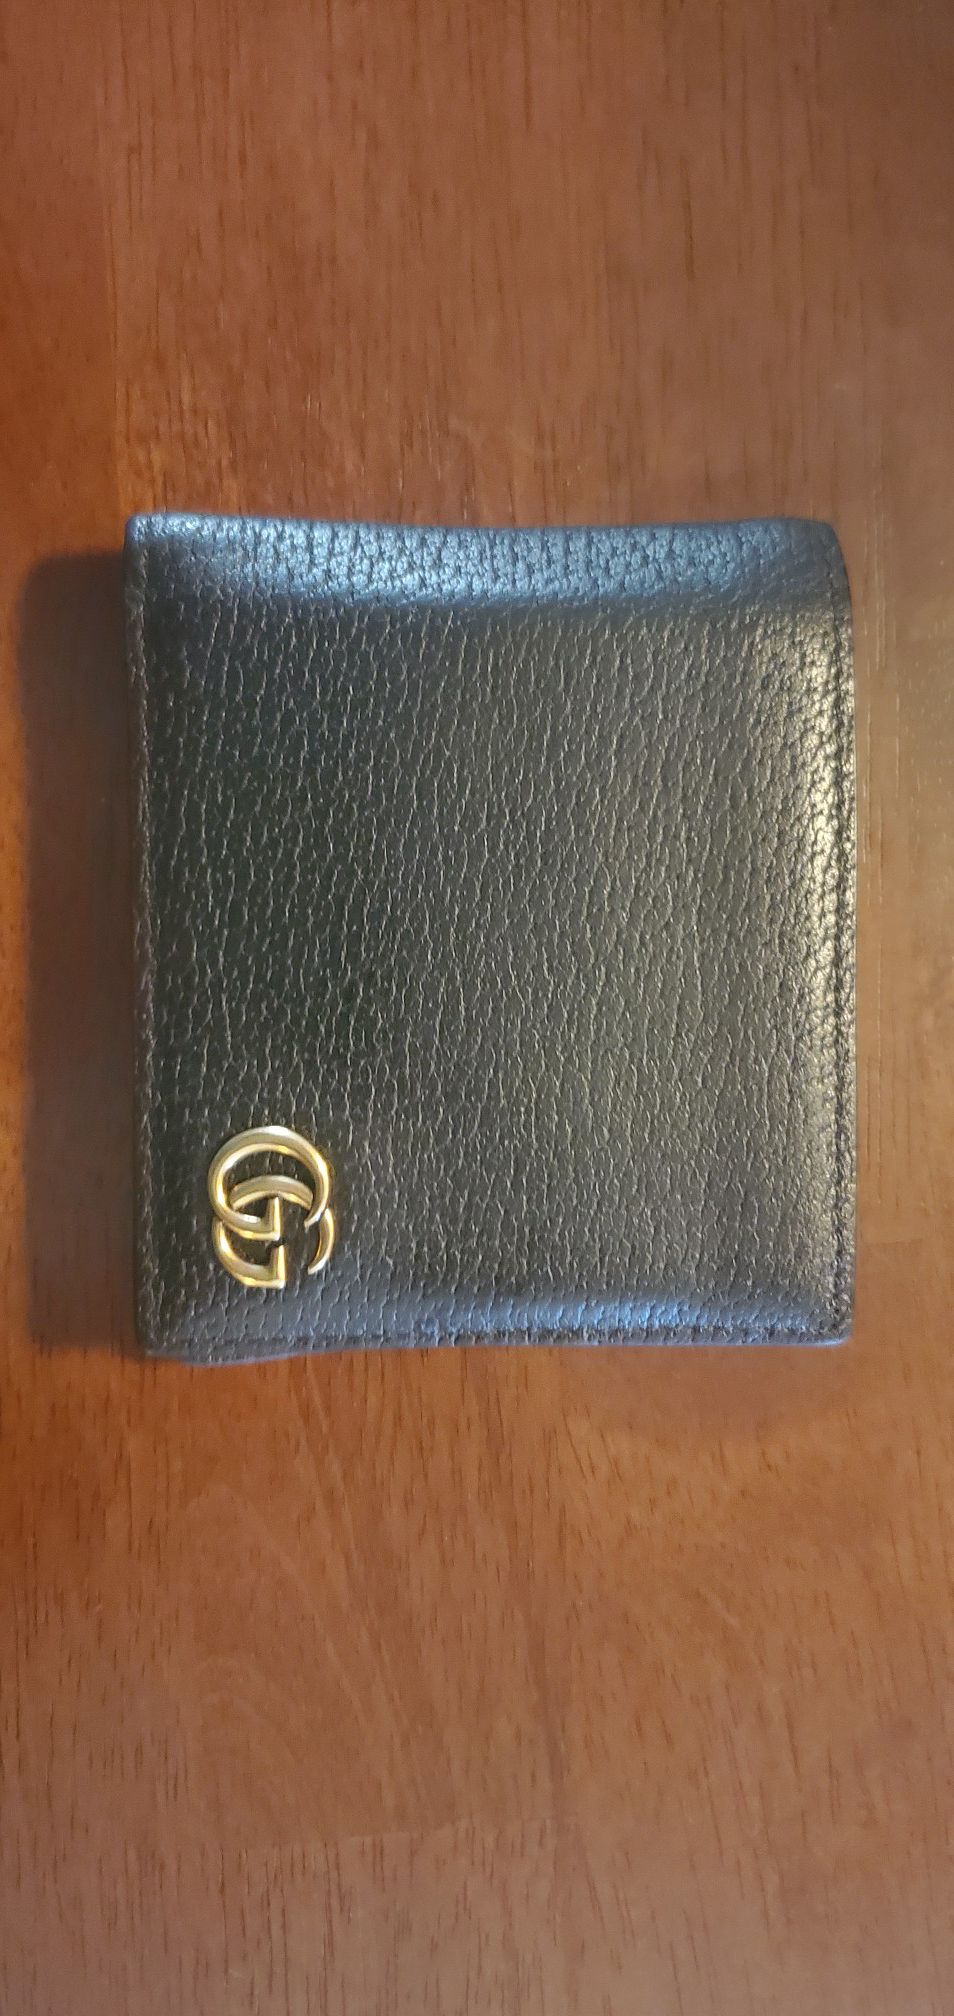 Authentic gucci wallet